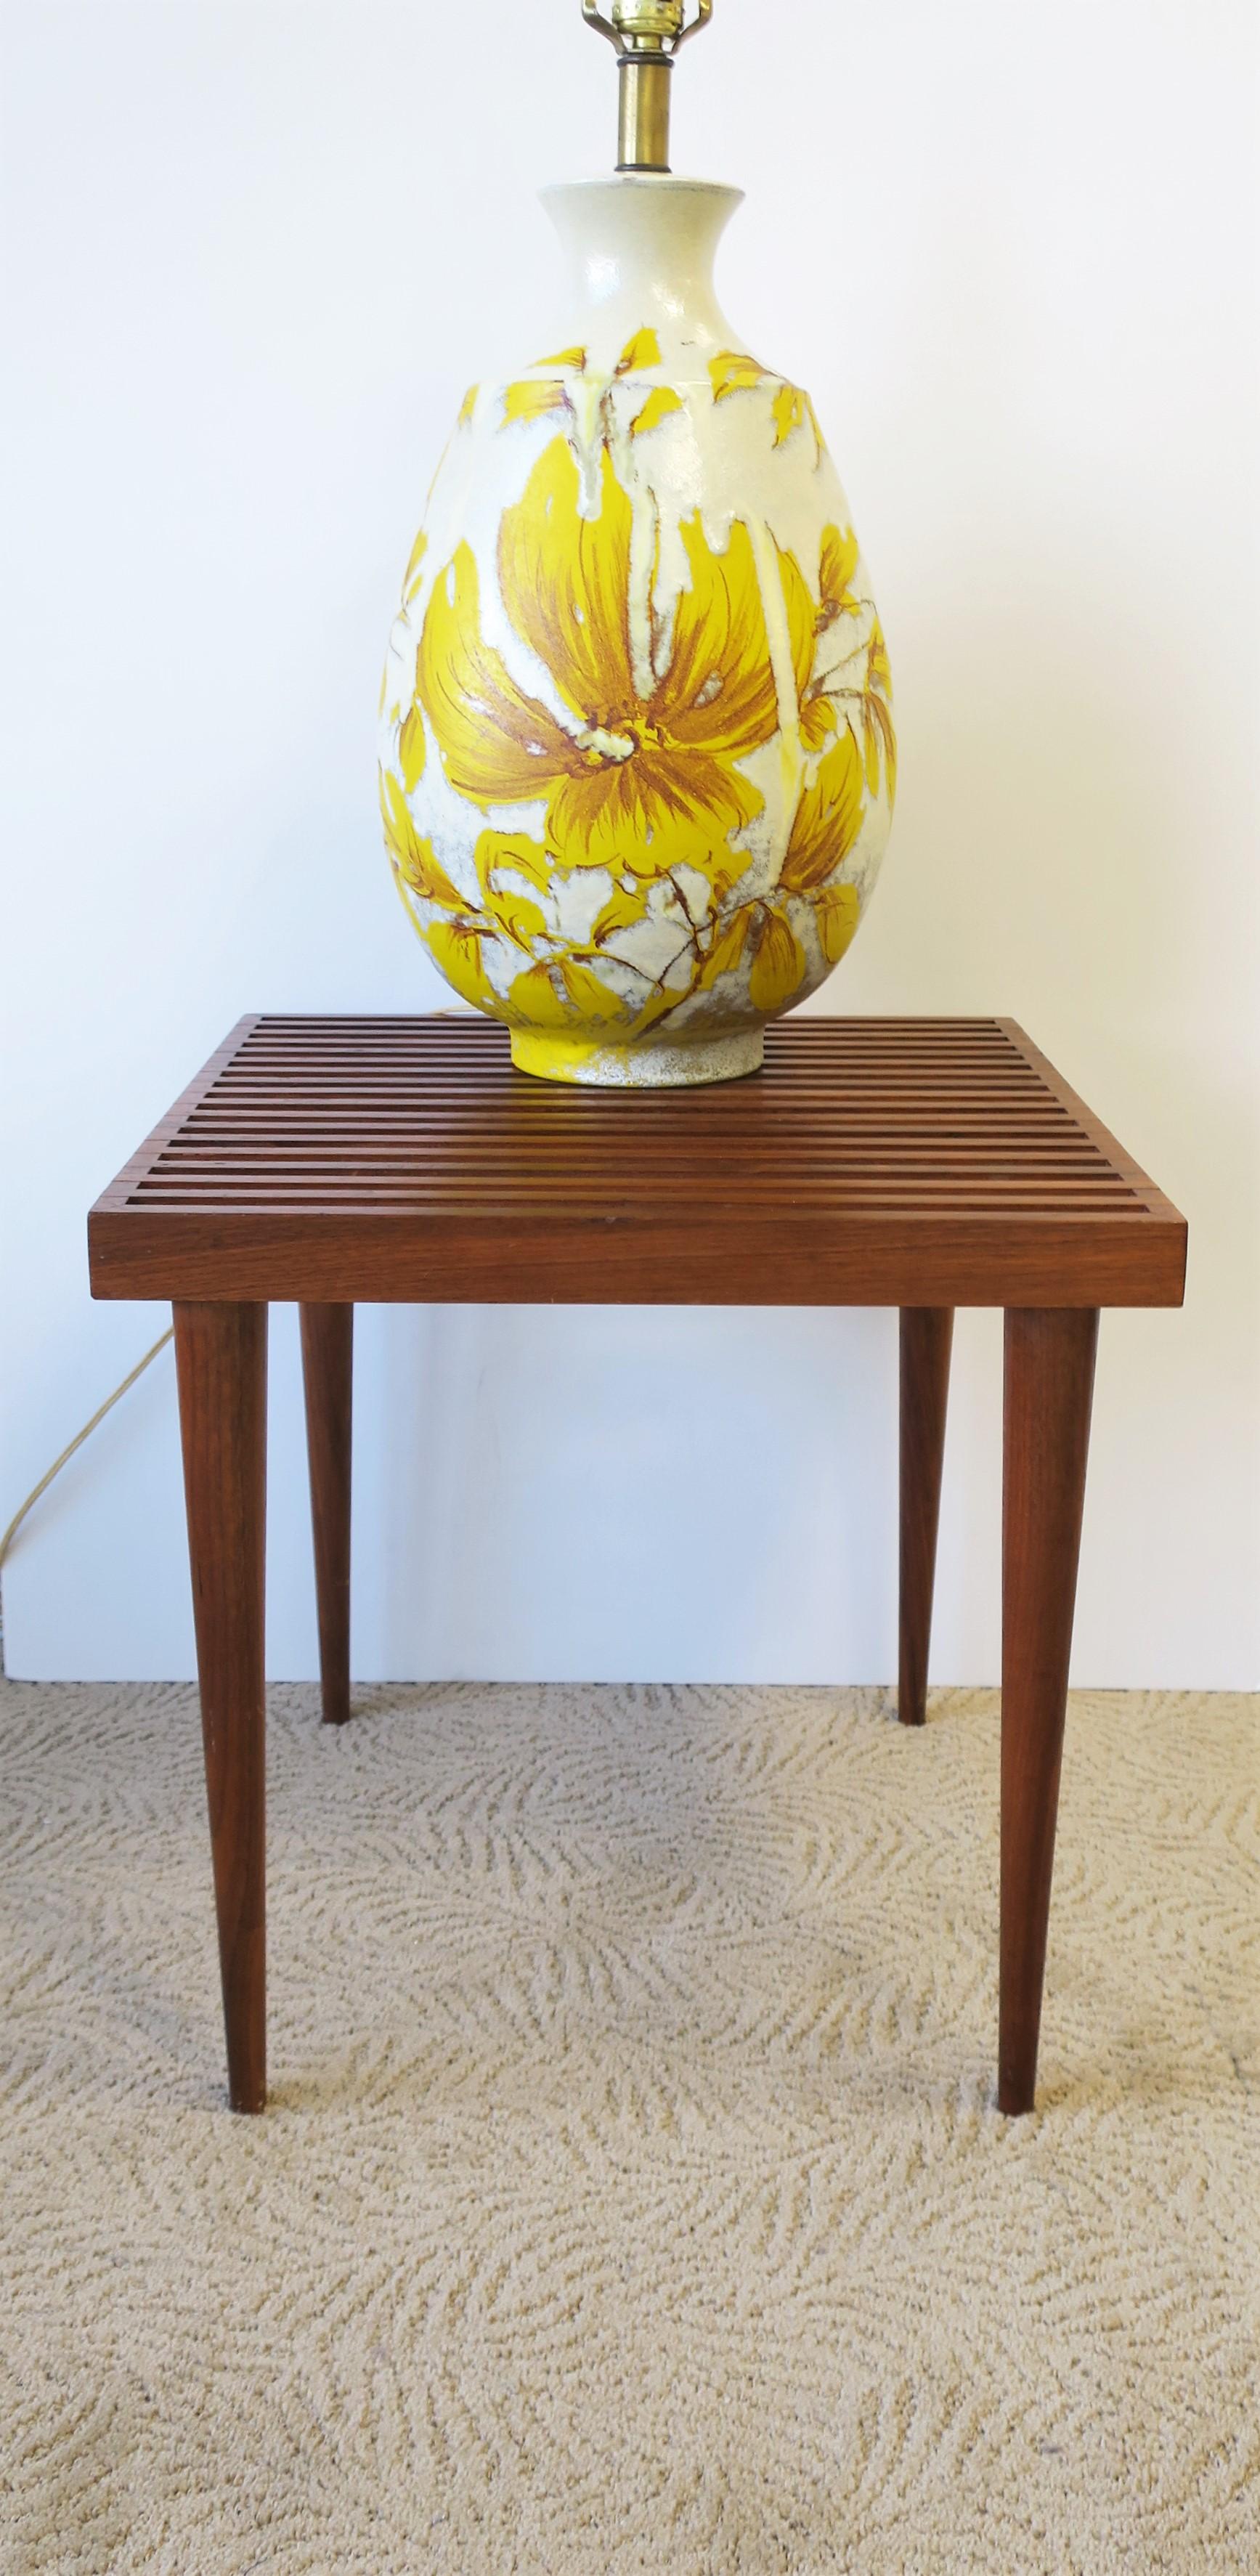 20th Century Midcentury Modern Slat Wood End or Side Table by Mel Smilow